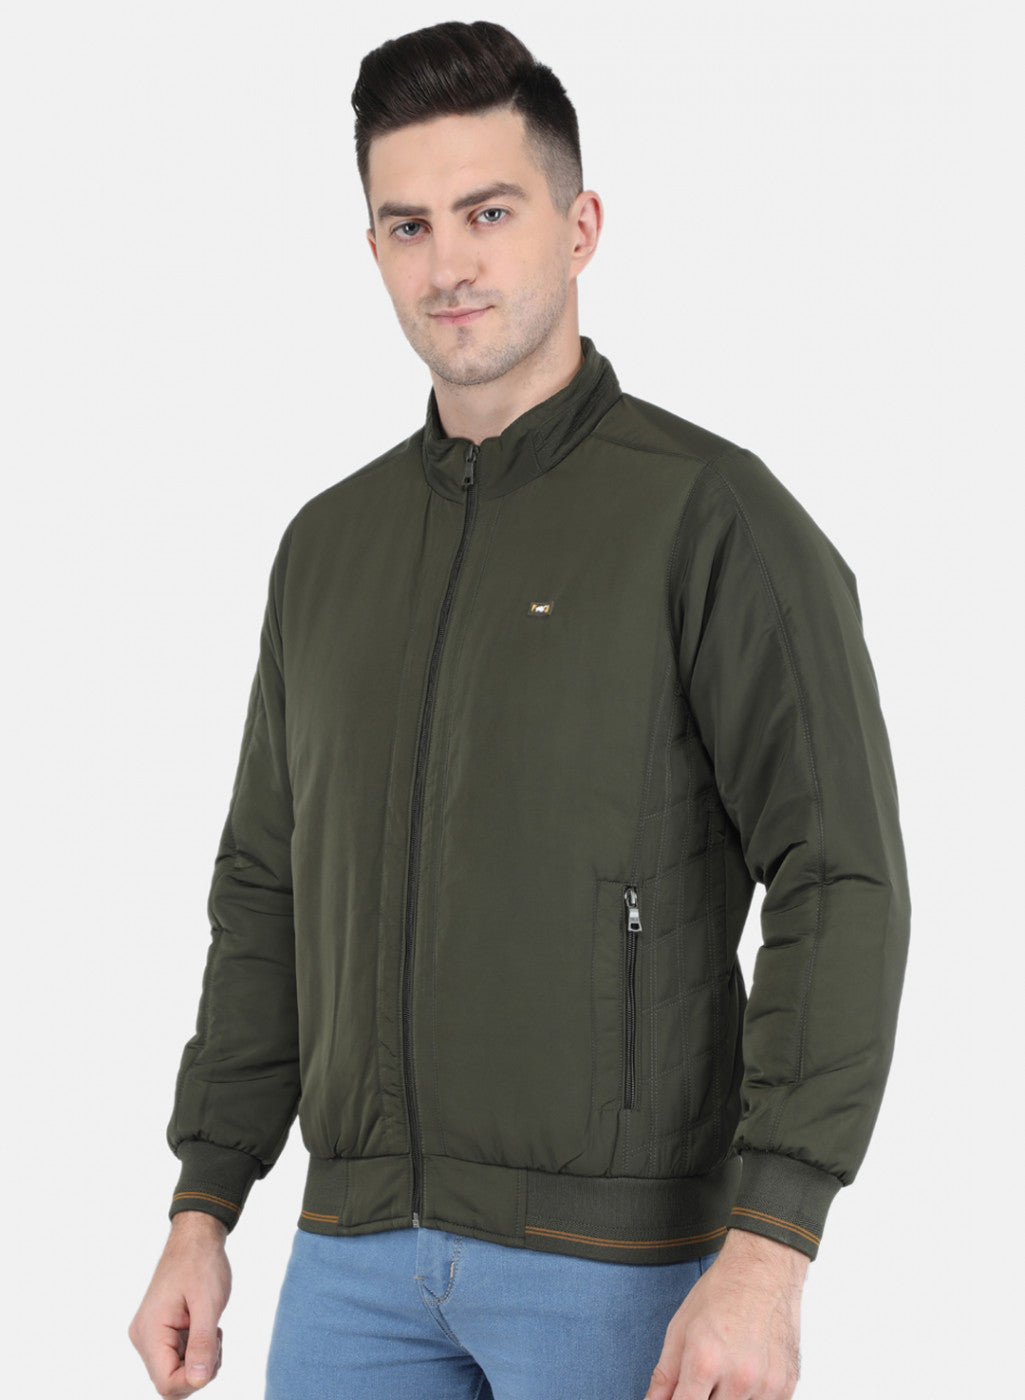 Add A Bomber Jacket In Olive Green To Your Friday Look